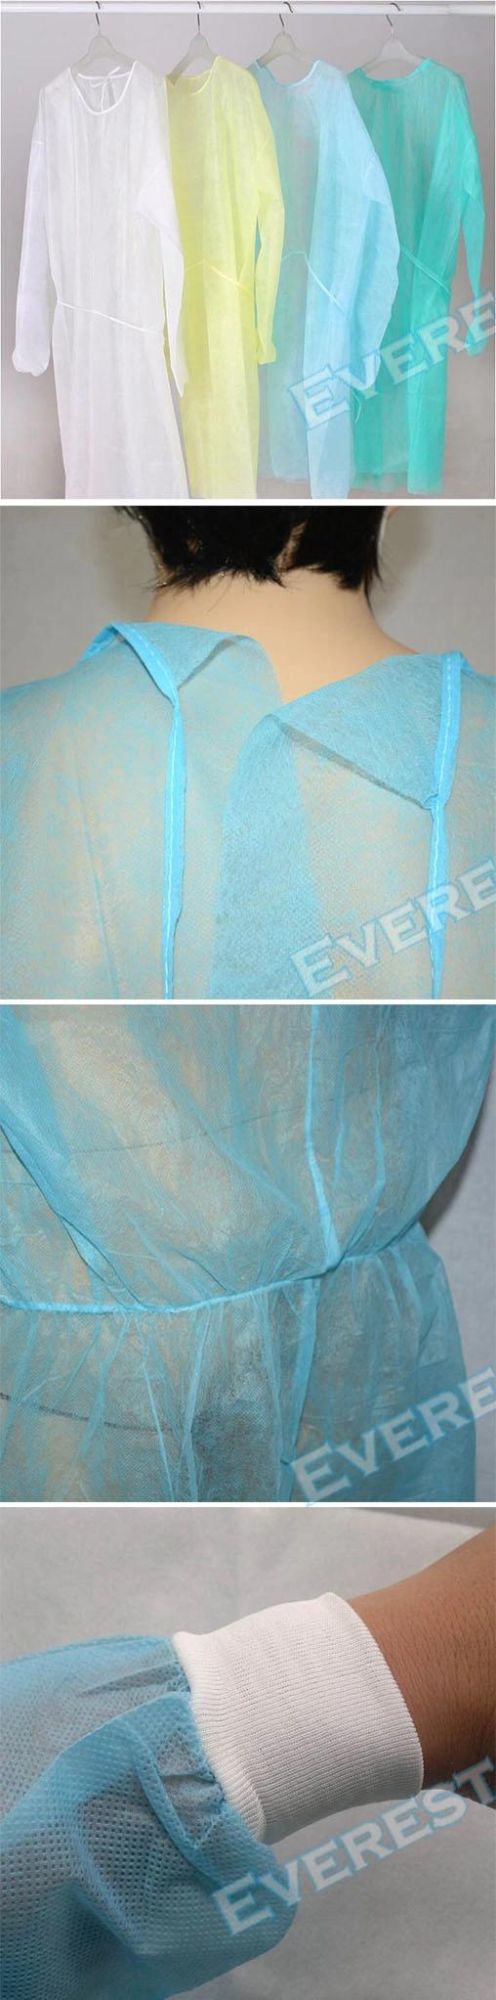 PP Disposable Nonwoven Tie Back Patient Surgical Gown/Isolation Gown/Vistor Gown